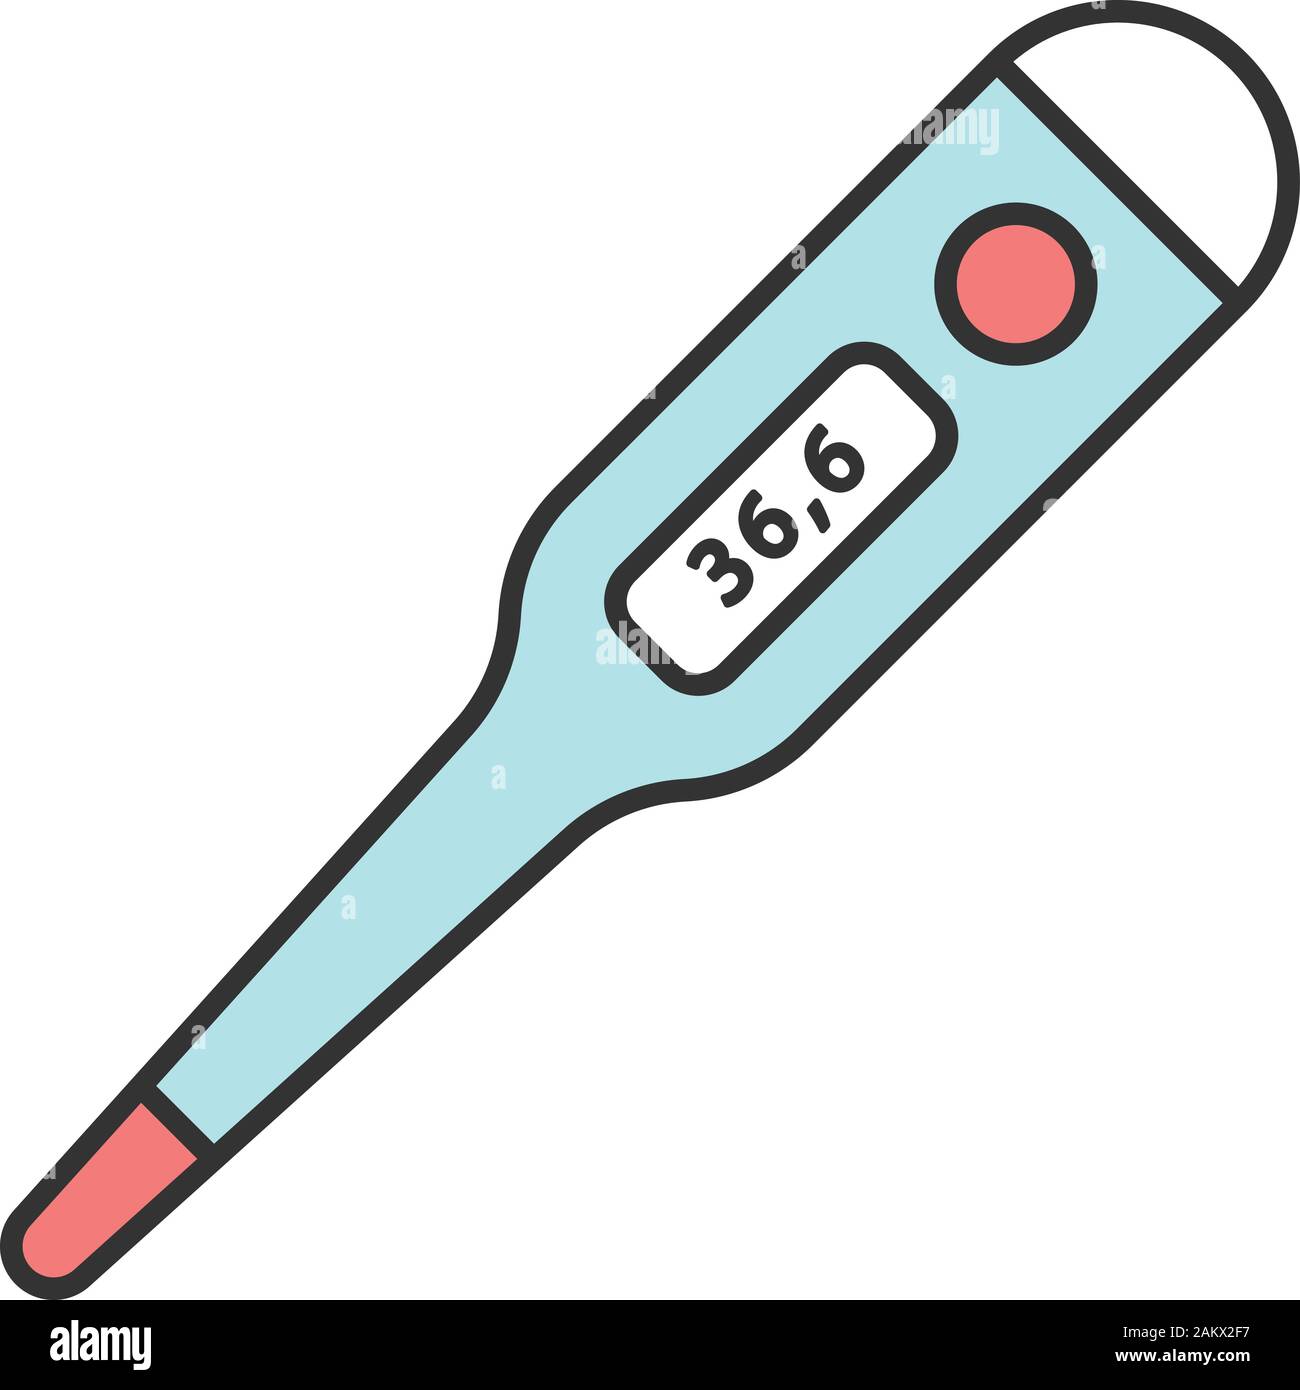 Axillary digital thermometer color icon. Body temperature measuring. Medical device. Electronic thermometer. Normal body temperature on display. Home Stock Vector